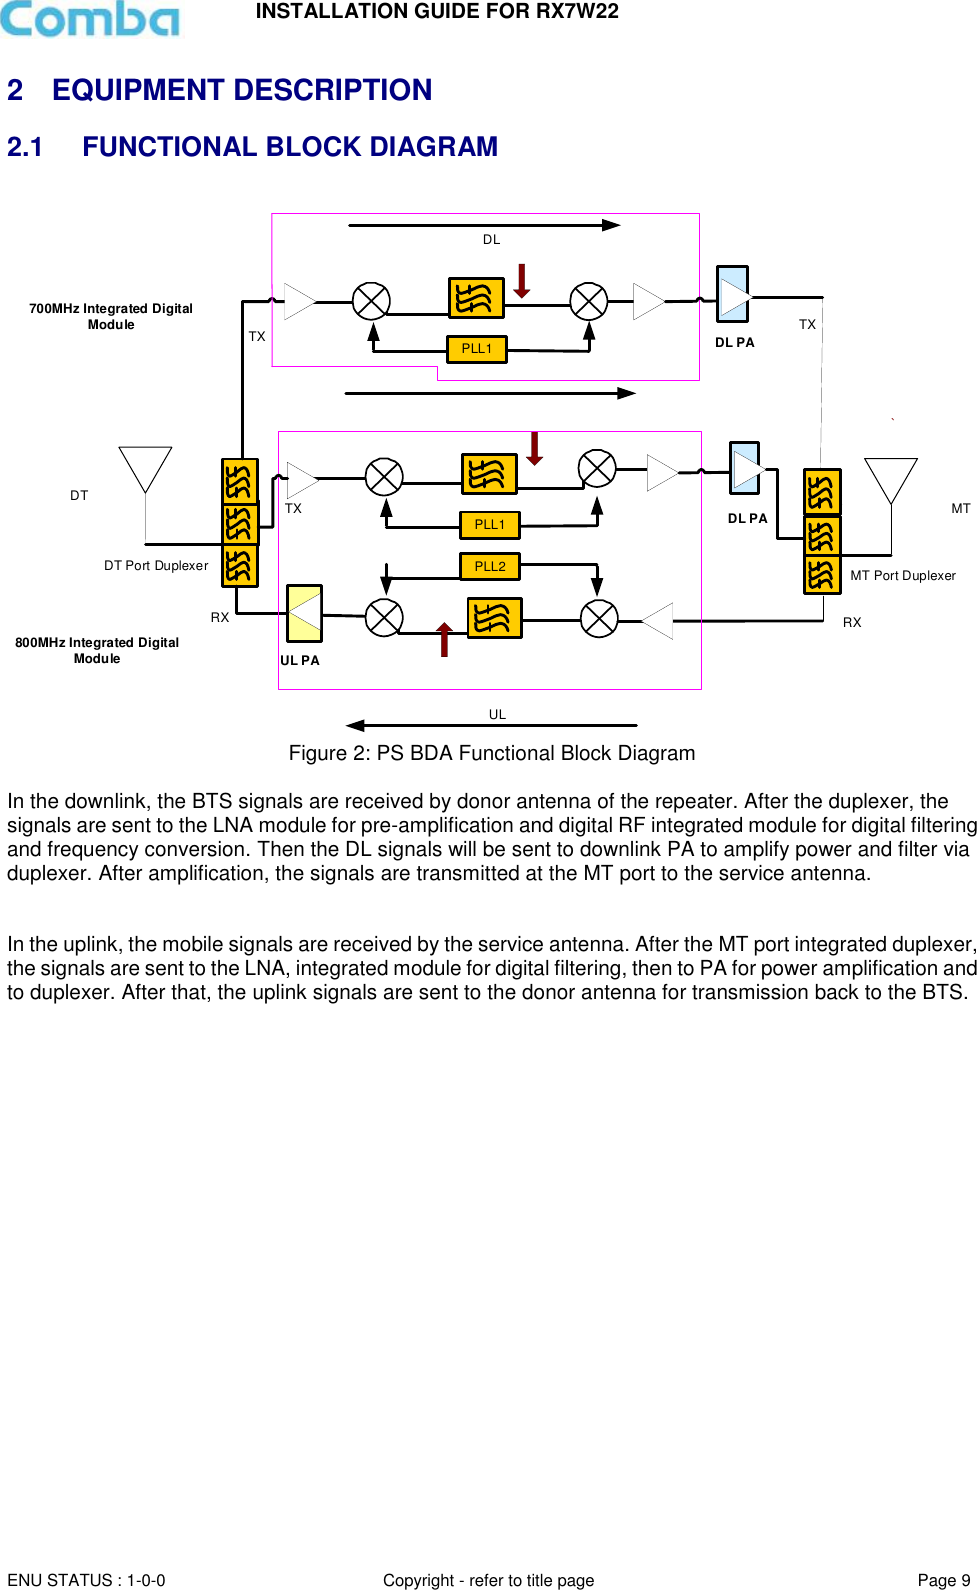 INSTALLATION GUIDE FOR RX7W22  ENU STATUS : 1-0-0 Copyright - refer to title page Page 9     2  EQUIPMENT DESCRIPTION 2.1  FUNCTIONAL BLOCK DIAGRAM   Figure 2: PS BDA Functional Block Diagram  In the downlink, the BTS signals are received by donor antenna of the repeater. After the duplexer, the signals are sent to the LNA module for pre-amplification and digital RF integrated module for digital filtering and frequency conversion. Then the DL signals will be sent to downlink PA to amplify power and filter via duplexer. After amplification, the signals are transmitted at the MT port to the service antenna.    In the uplink, the mobile signals are received by the service antenna. After the MT port integrated duplexer, the signals are sent to the LNA, integrated module for digital filtering, then to PA for power amplification and to duplexer. After that, the uplink signals are sent to the donor antenna for transmission back to the BTS.                 RXDL PAMT Port DuplexerUL`TX MTPLL2RXTXDT Port DuplexerDTPLL1800MHz Integrated Digital Module           DL PATXPLL1TX700MHz Integrated Digital ModuleDLUL PA